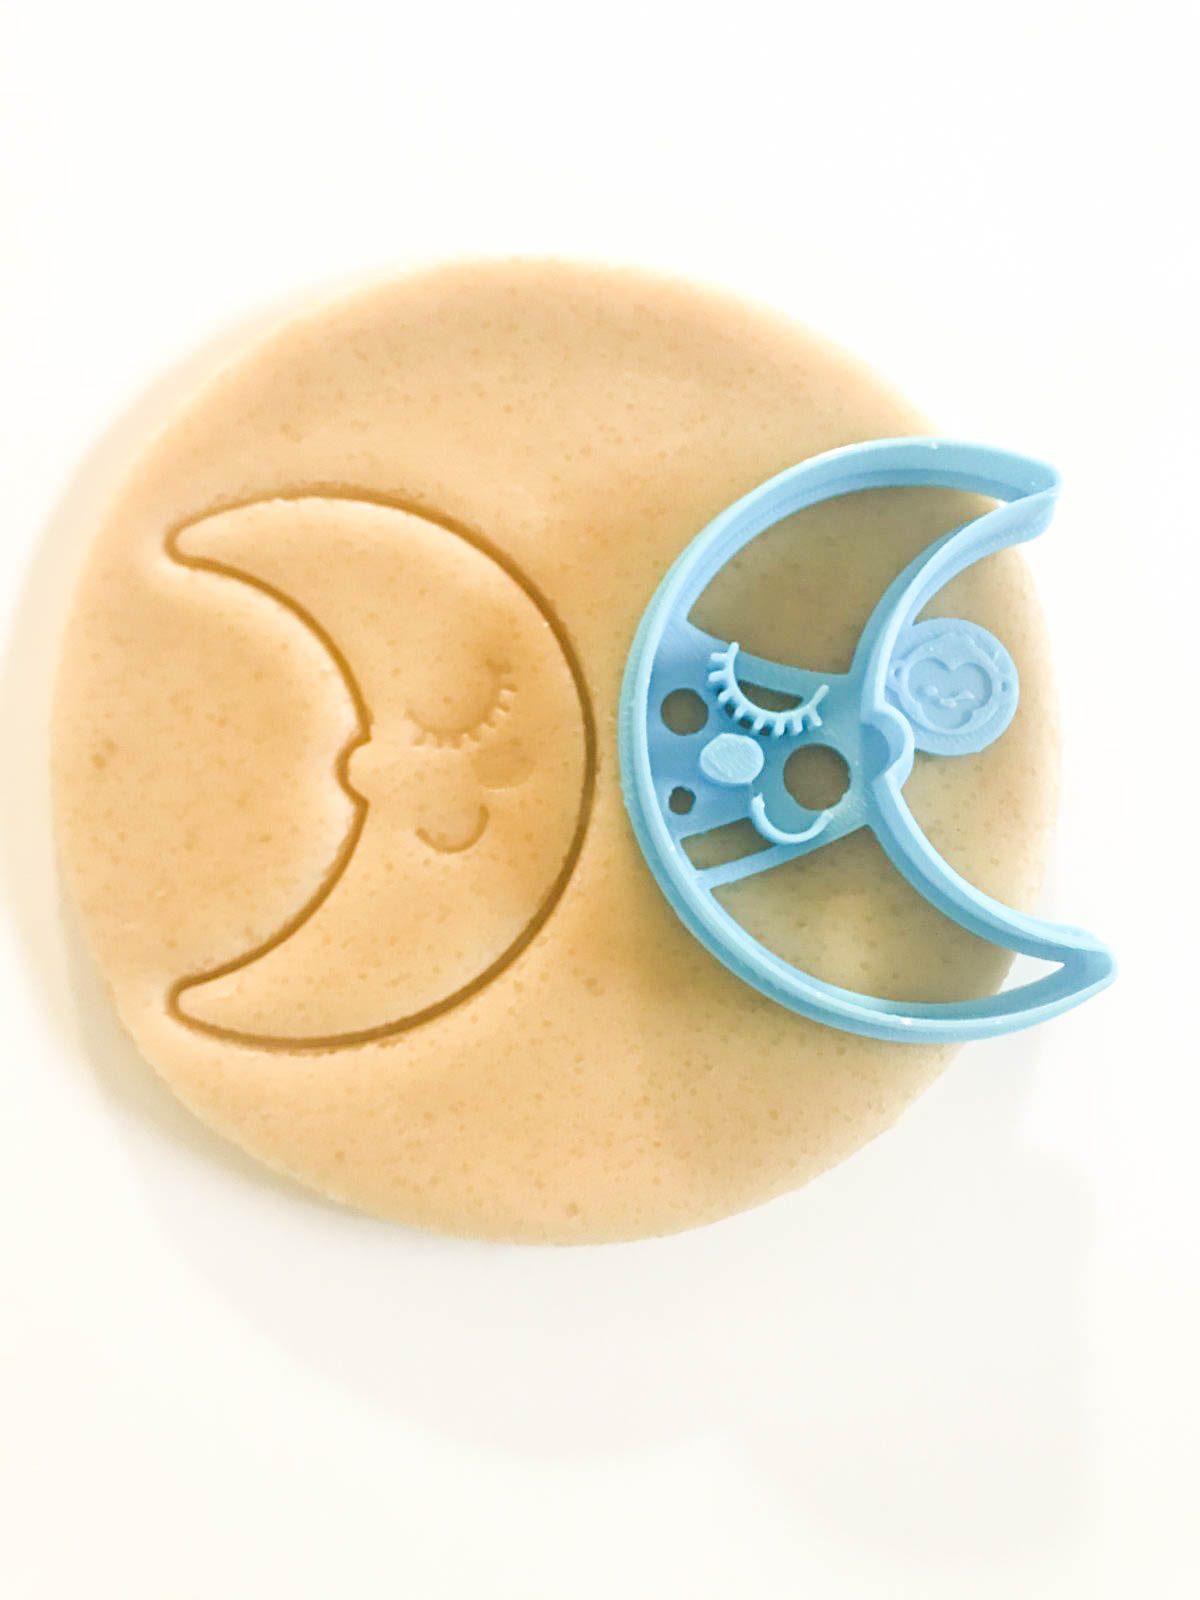 Blushing Crescent Moon Cookie Cutter